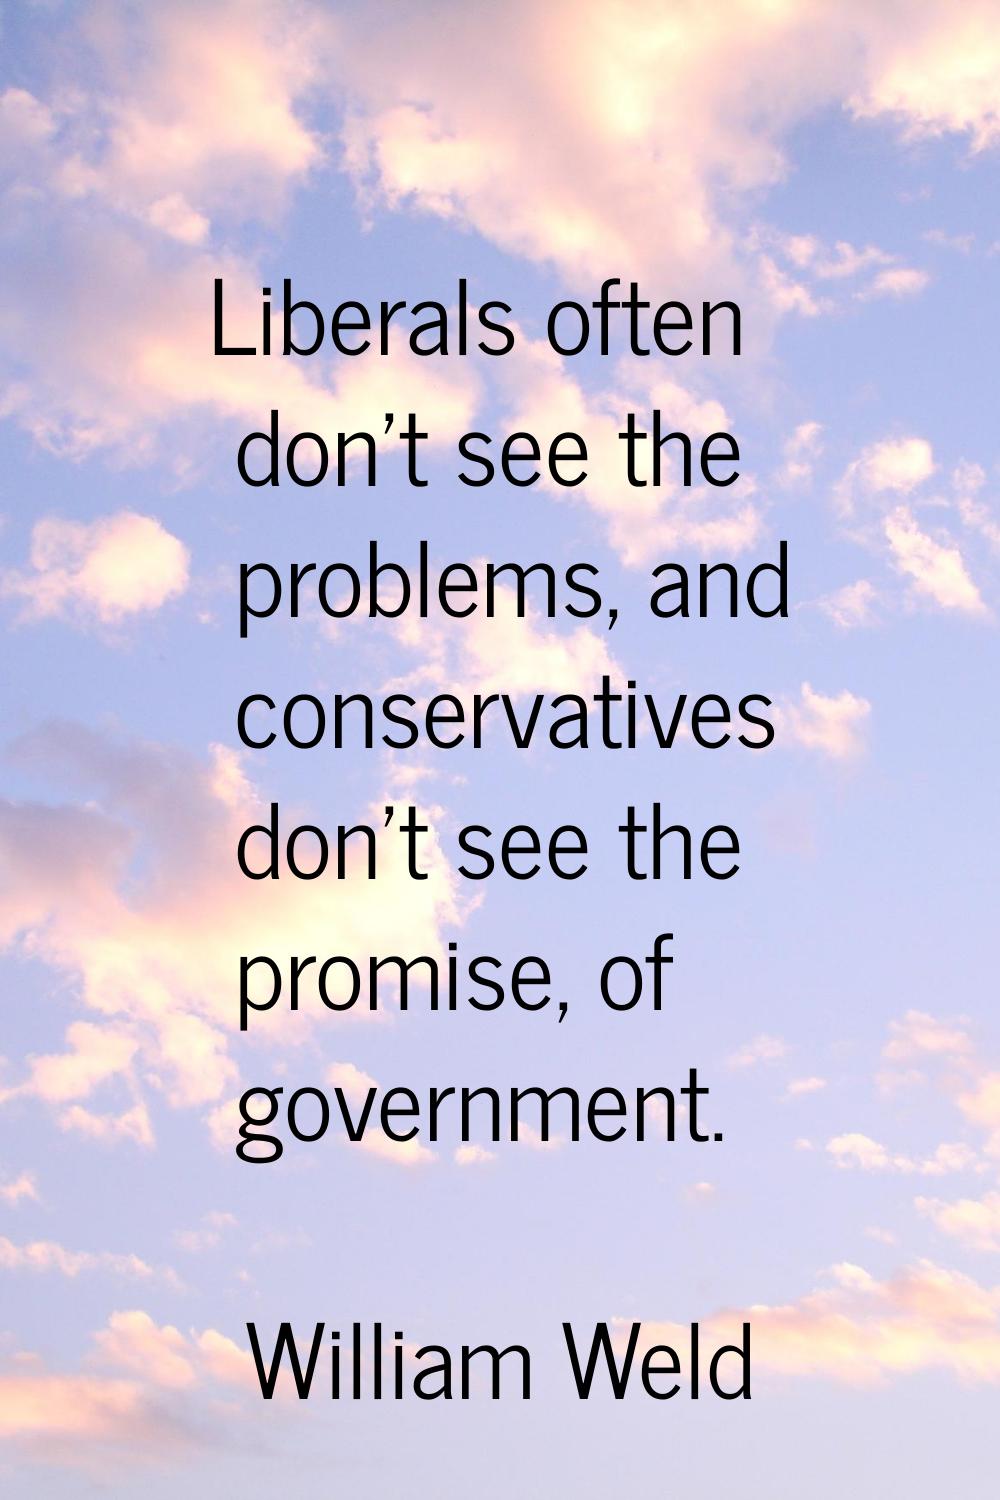 Liberals often don't see the problems, and conservatives don't see the promise, of government.